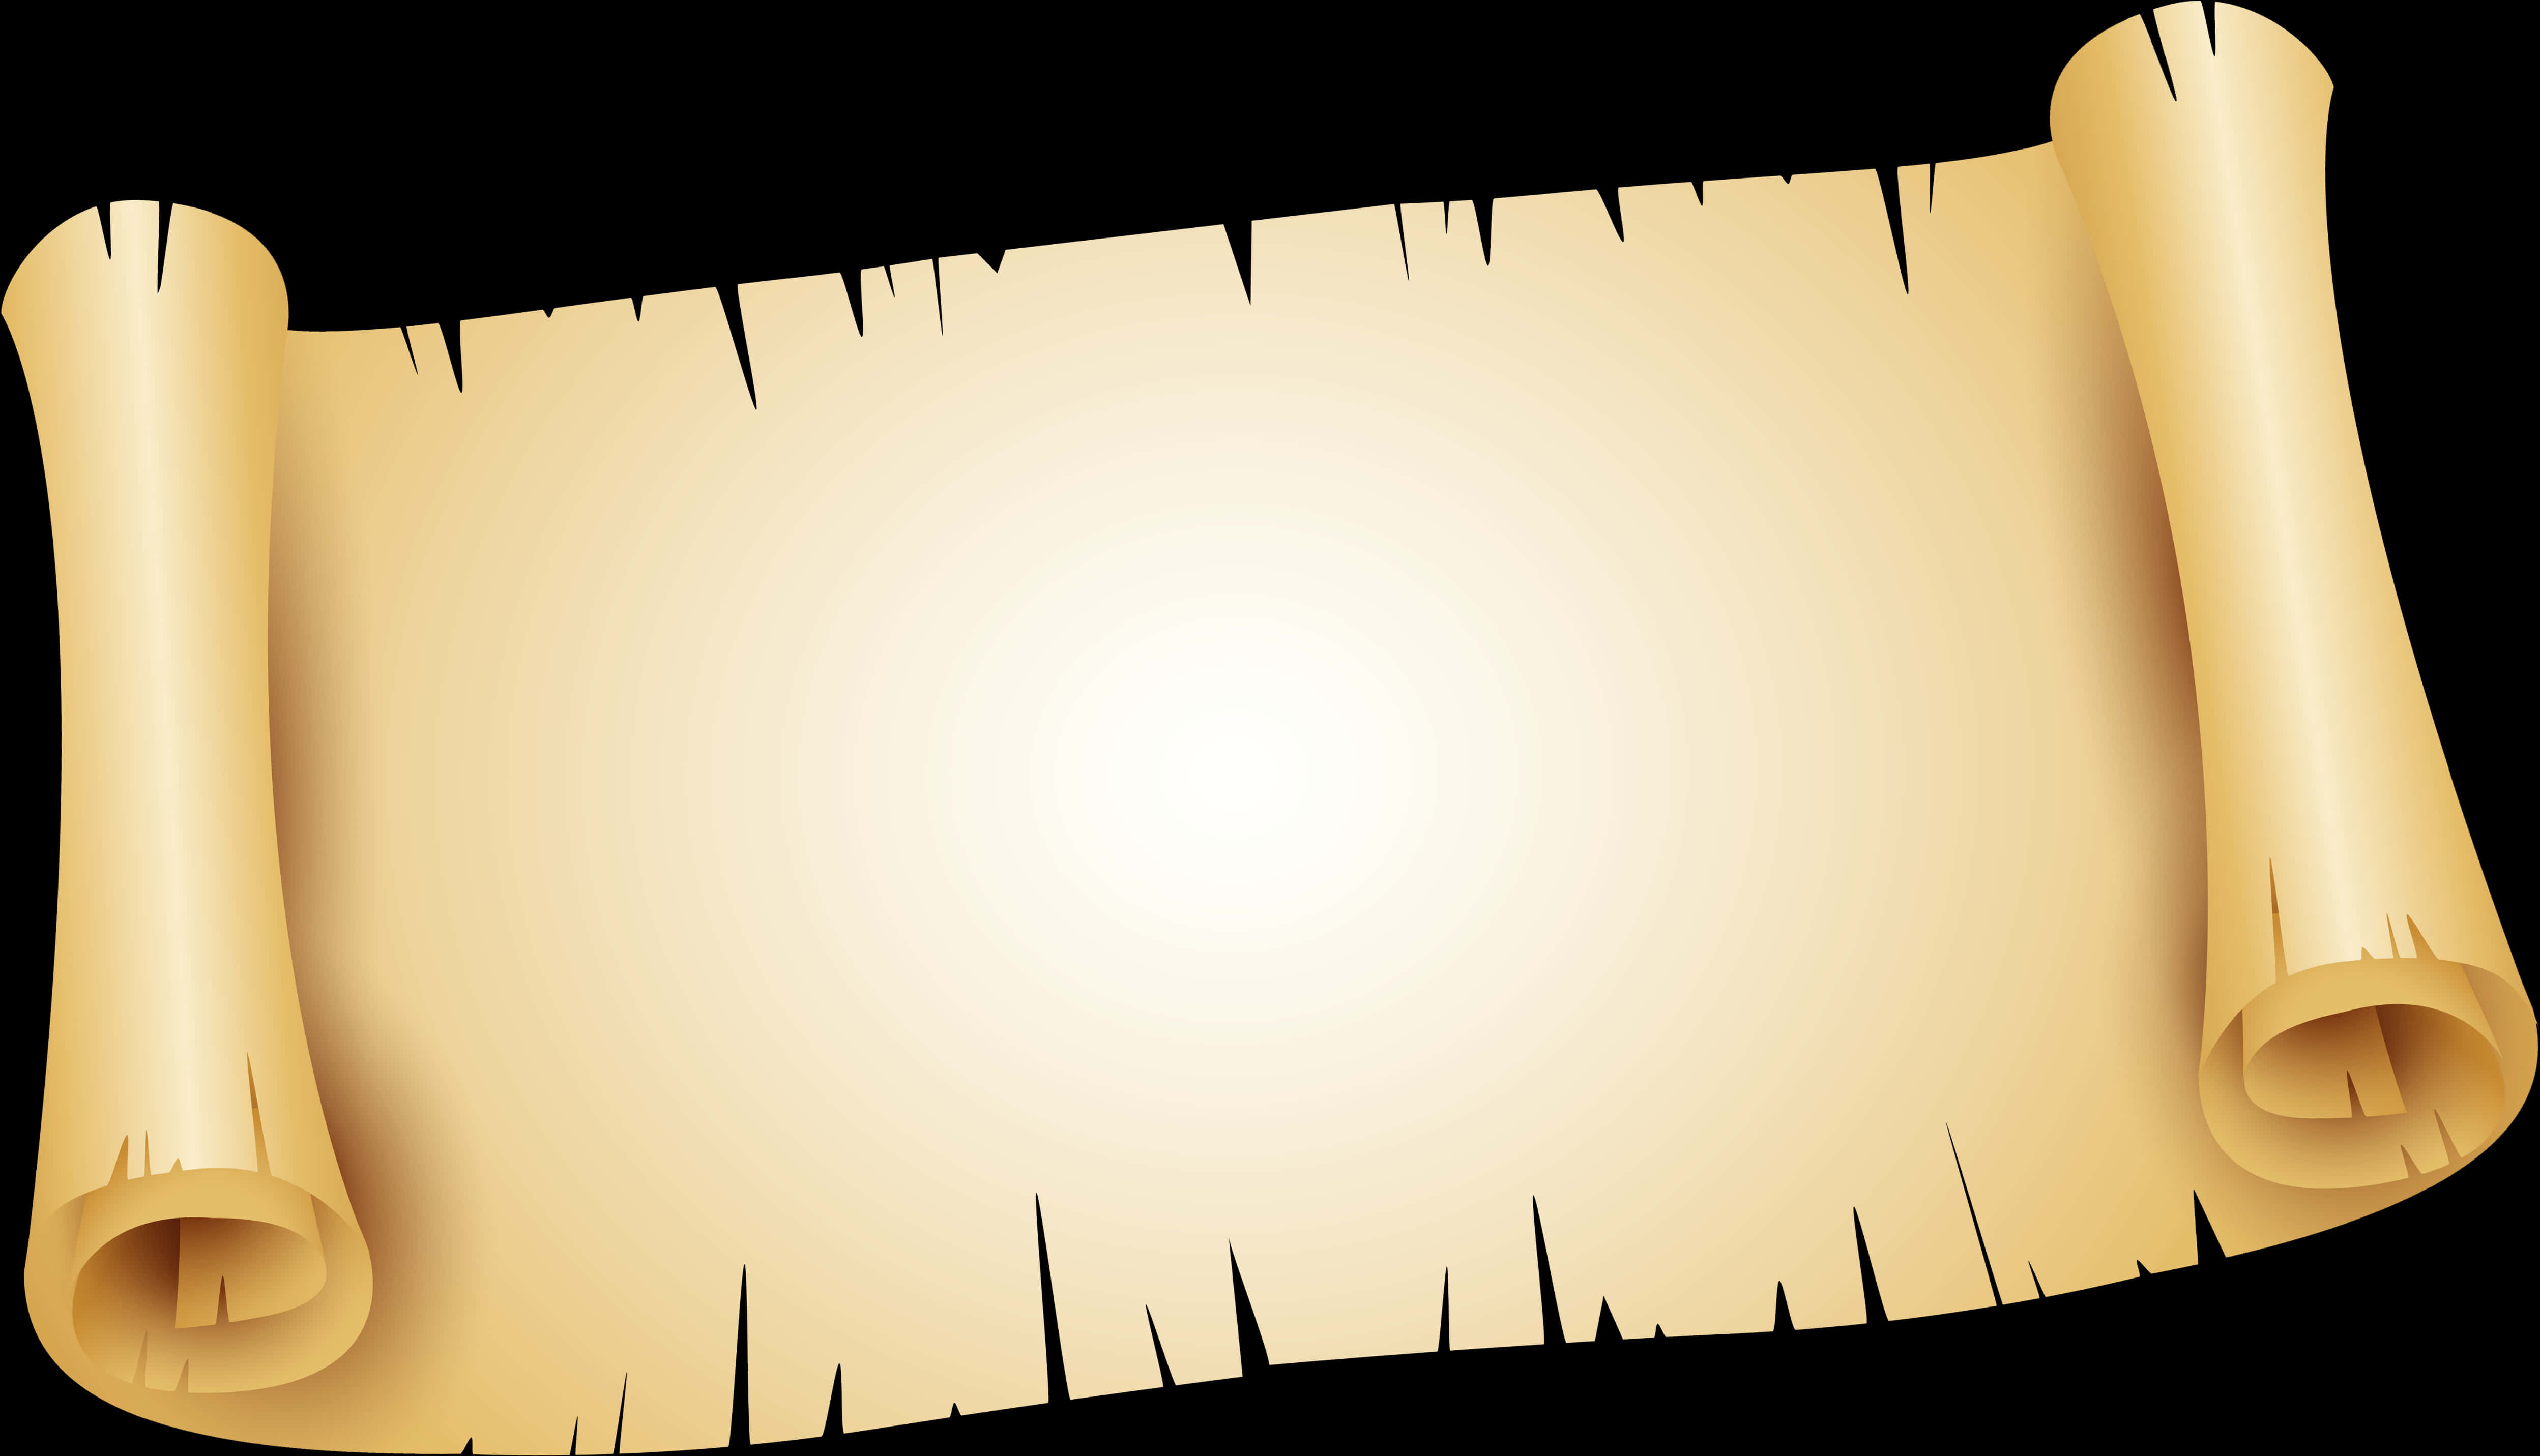 Ancient Scroll Graphic PNG image